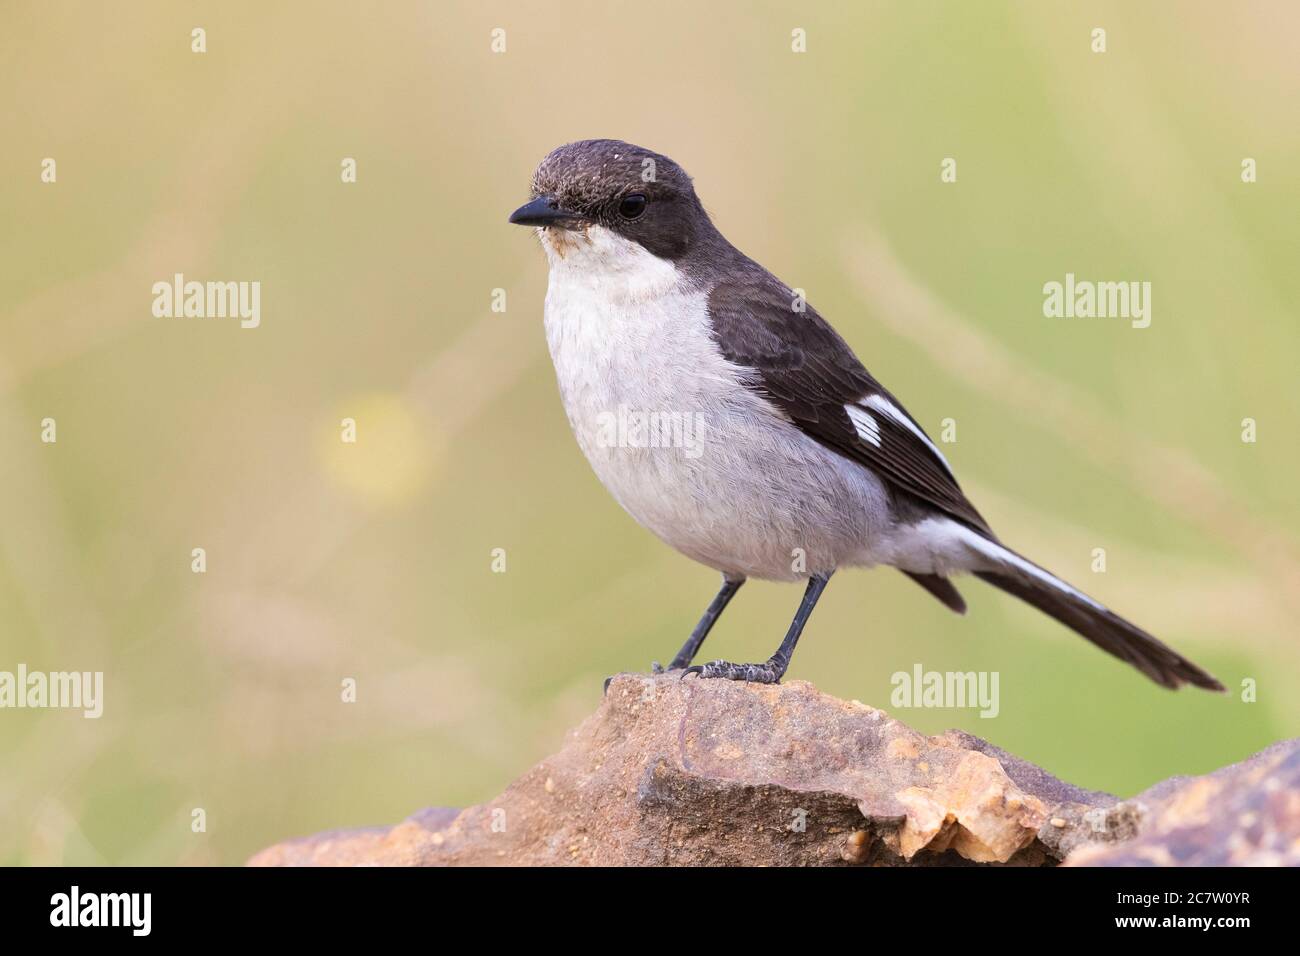 Fiscal Flycatcher (Melaenornis silens), adult female standing on a rock, Western Cape, South Africa Stock Photo